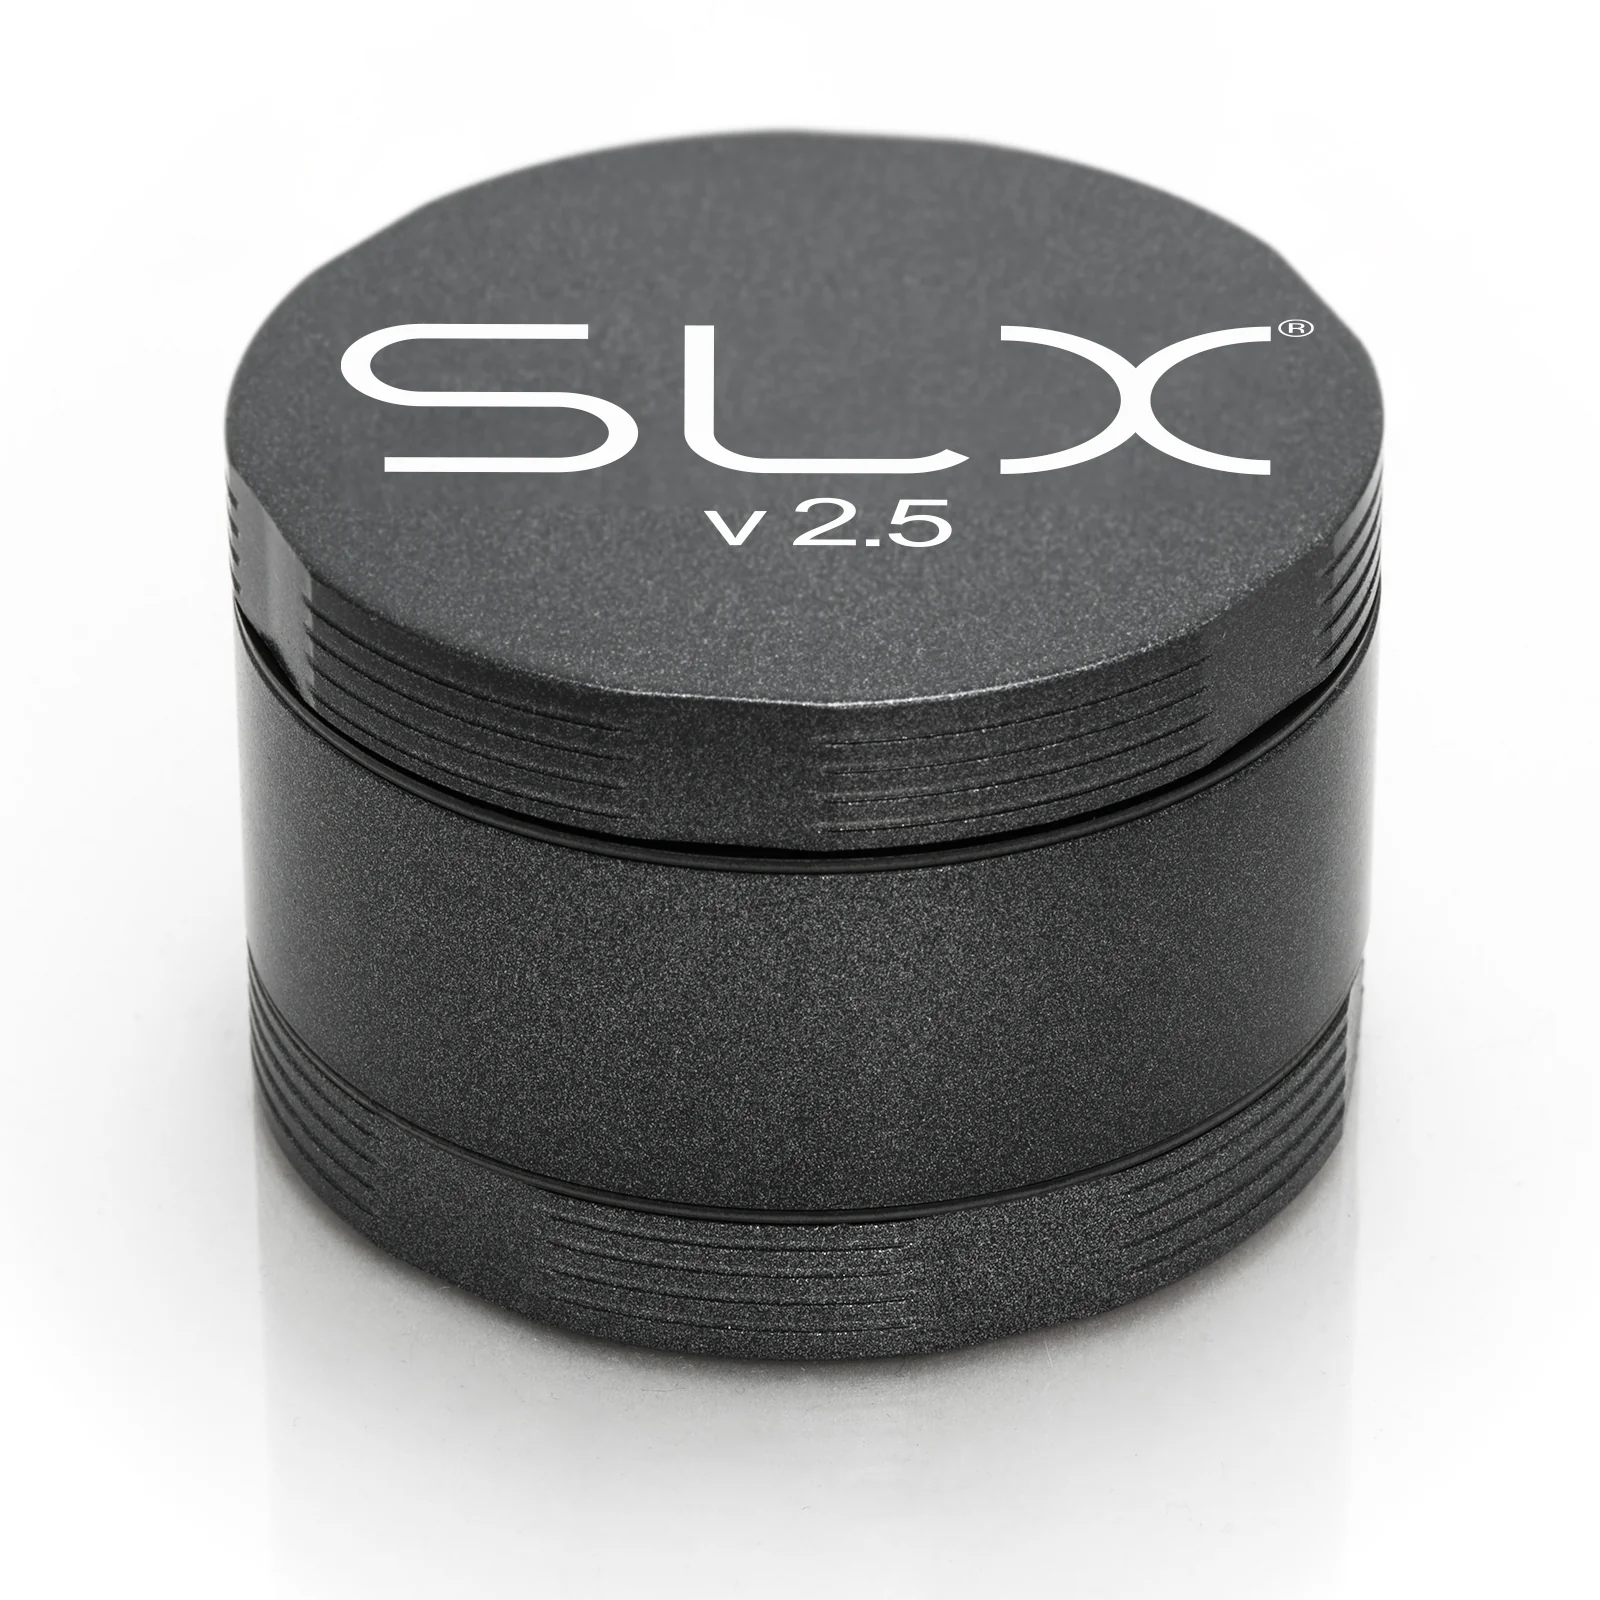 03 SLX Herb Grinders Isolation Pictures For Web Charcoal fa44d4e3 ca55 4ef0 9753